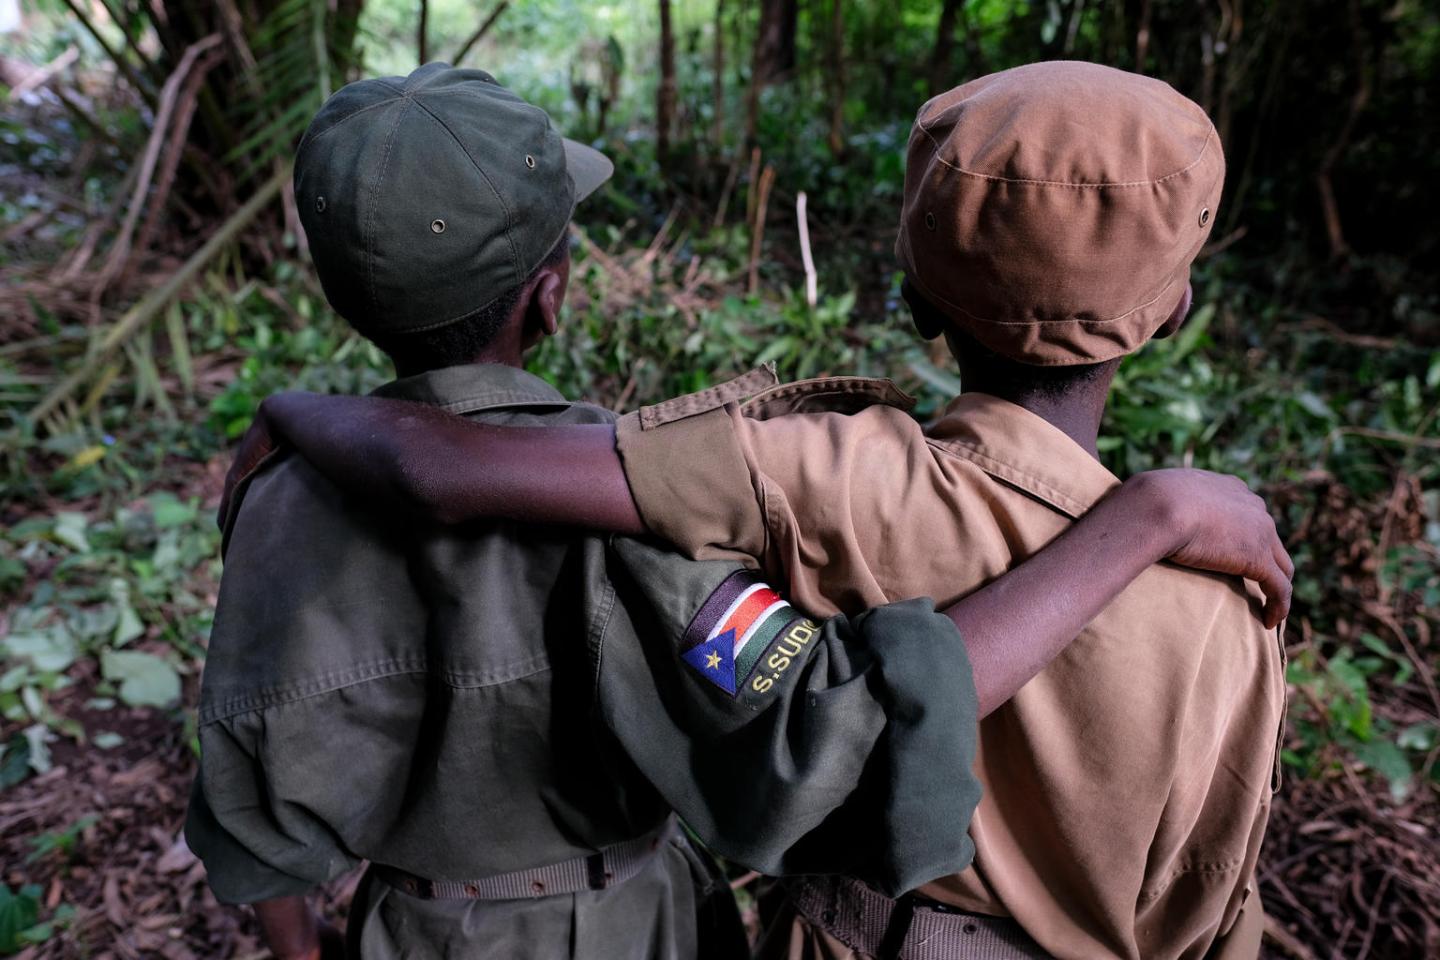 African Child Soldiers: The Children Fighting Adults’ Wars